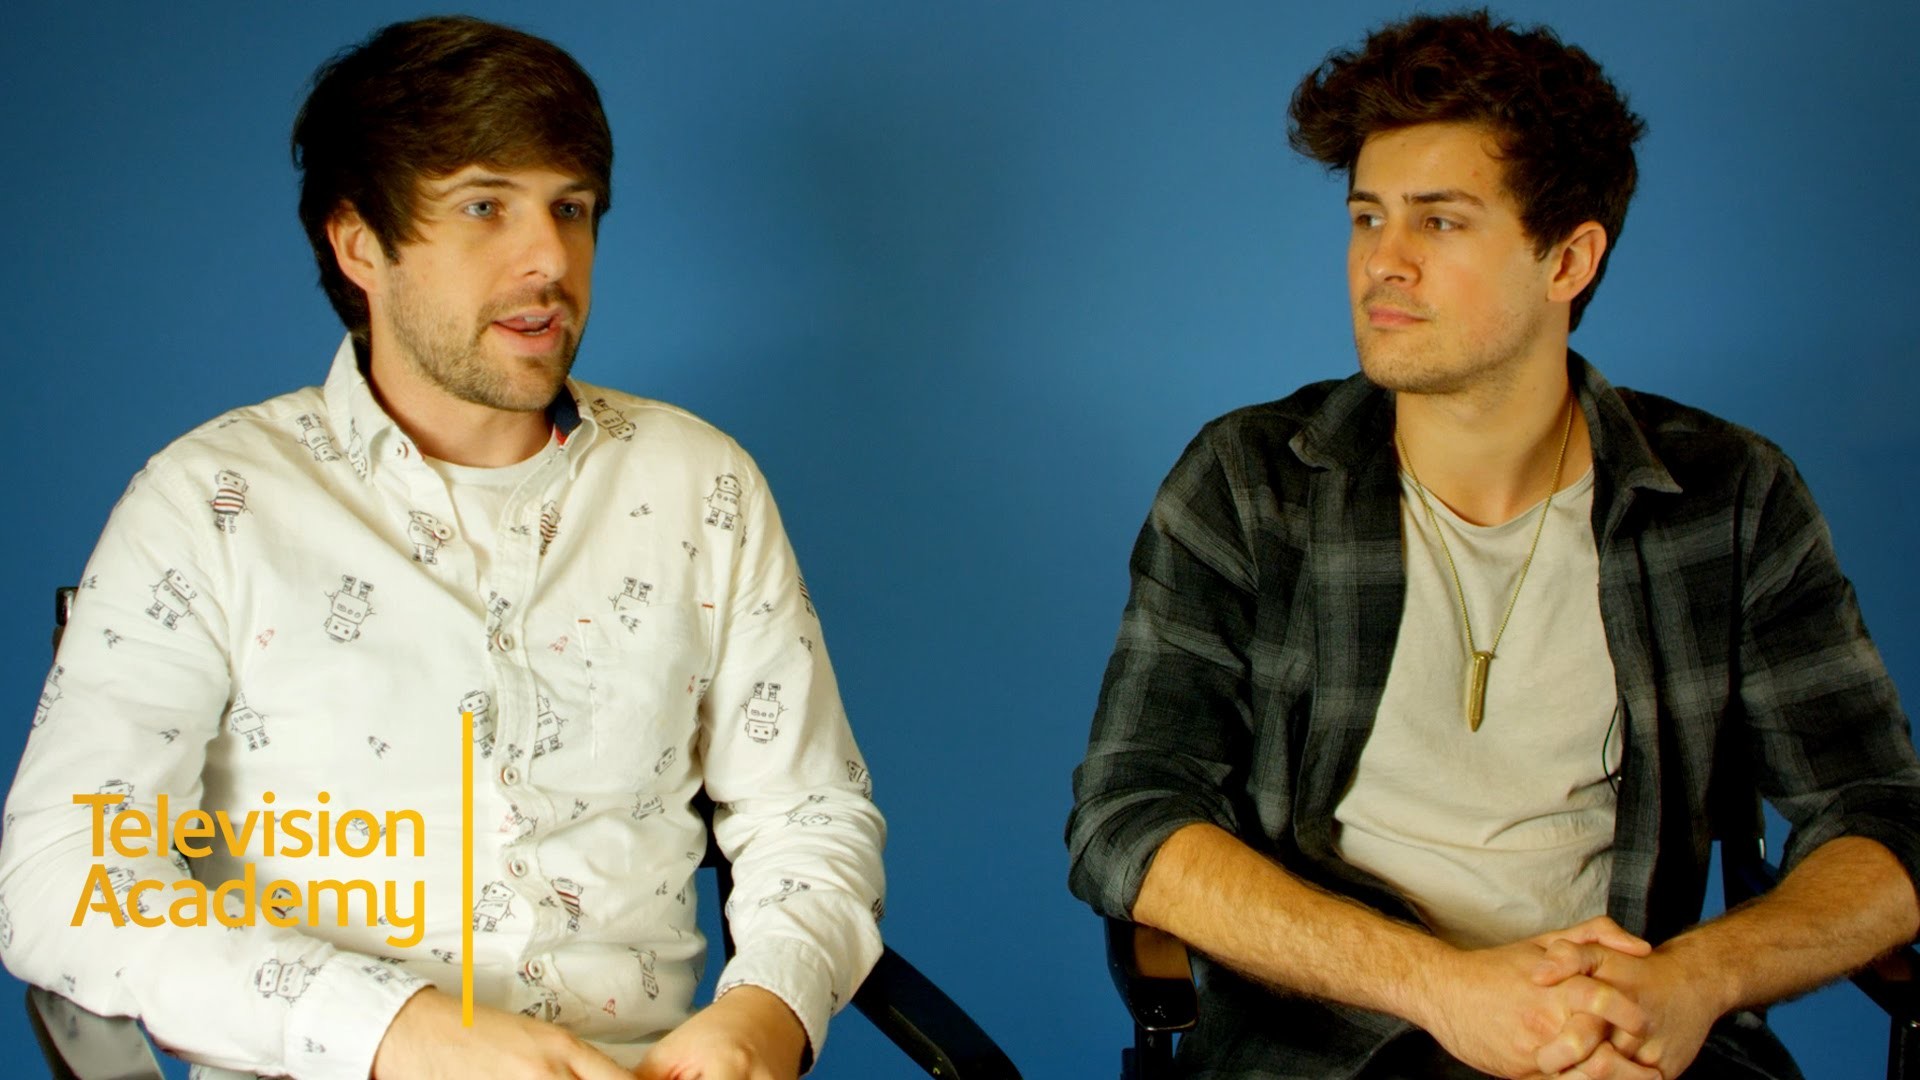 1920x1080 The Backstory | Smosh: The YouTube Superstars Talk PART TIMERS